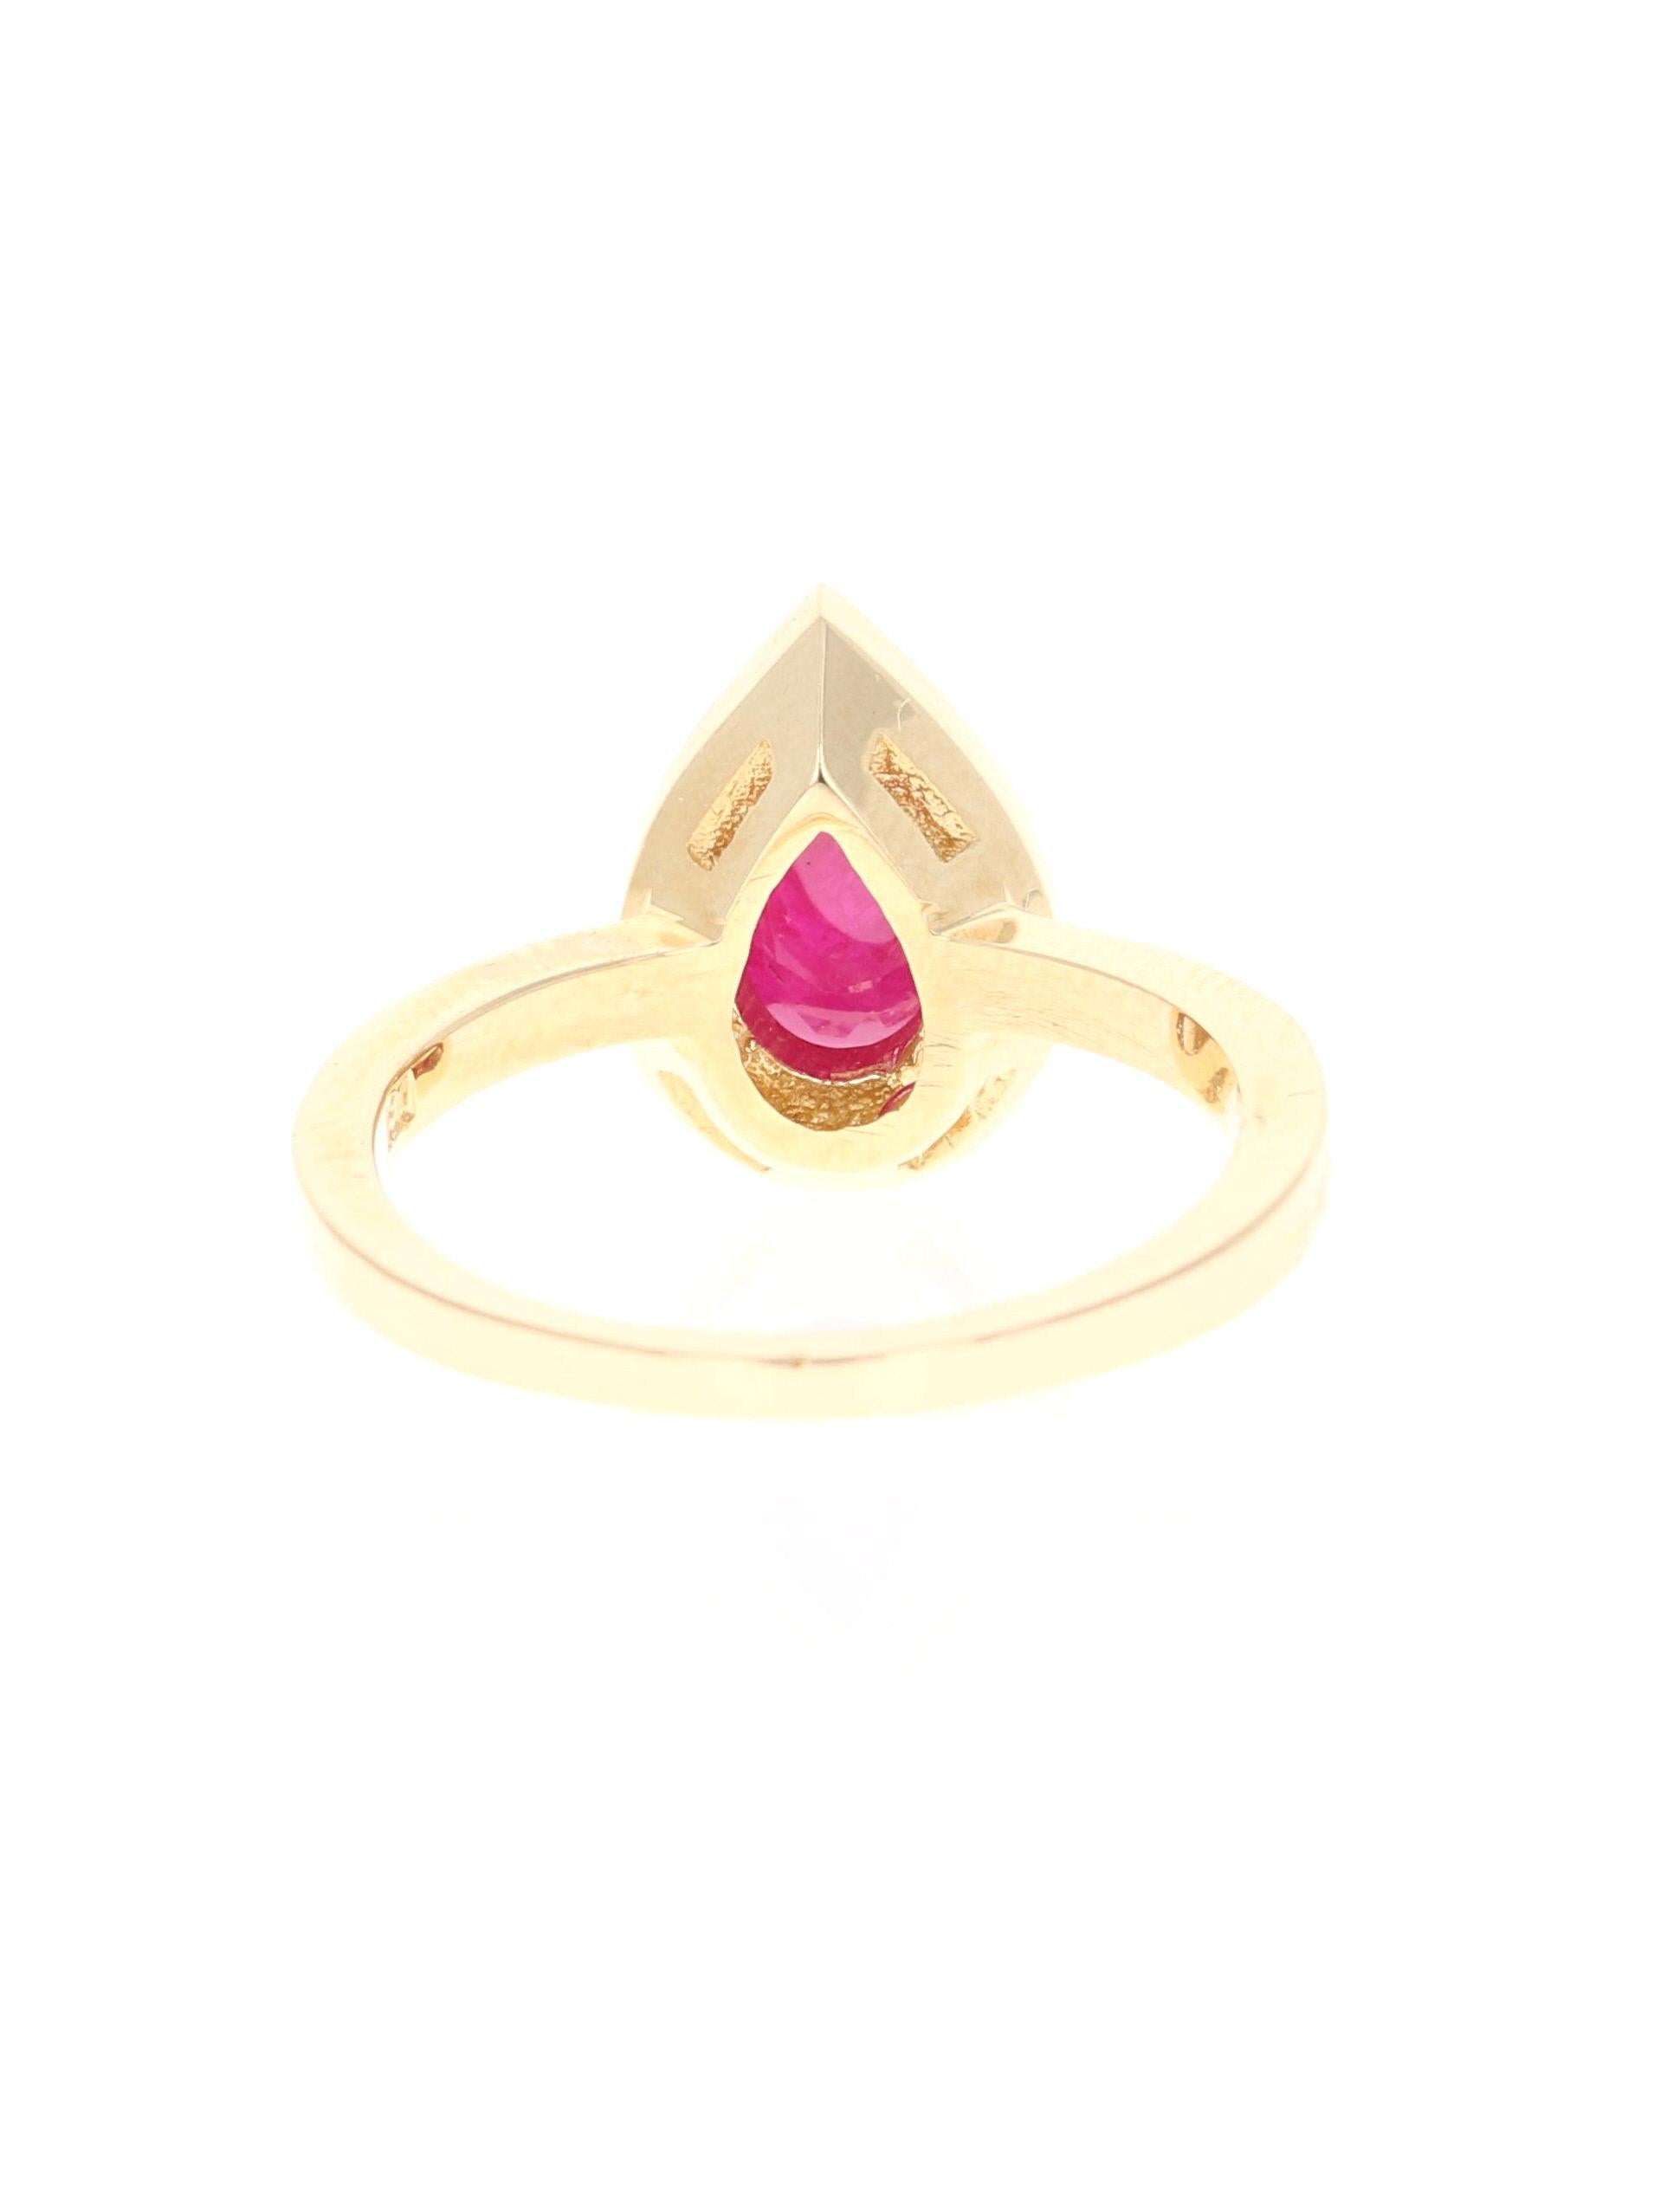 Pear Cut 1.70 Carat Ruby Diamond Yellow Gold Engagement Ring For Sale